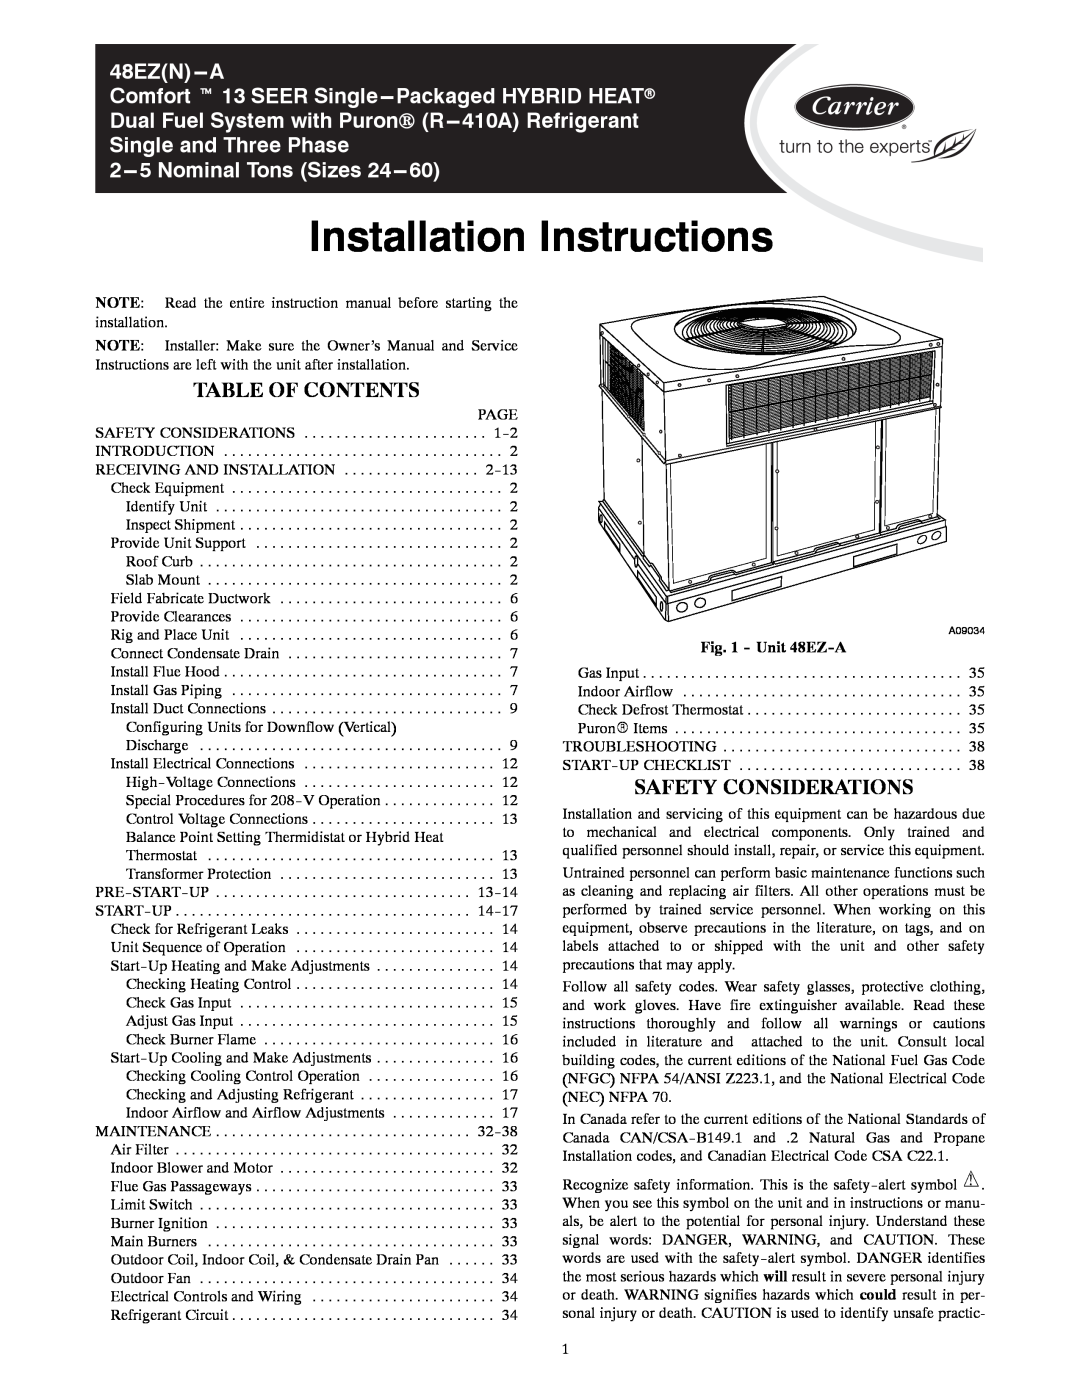 Carrier 48EZ(N)-A installation instructions Table Of Contents, Safety Considerations, Unit 48EZ-A, 48EZN---A 